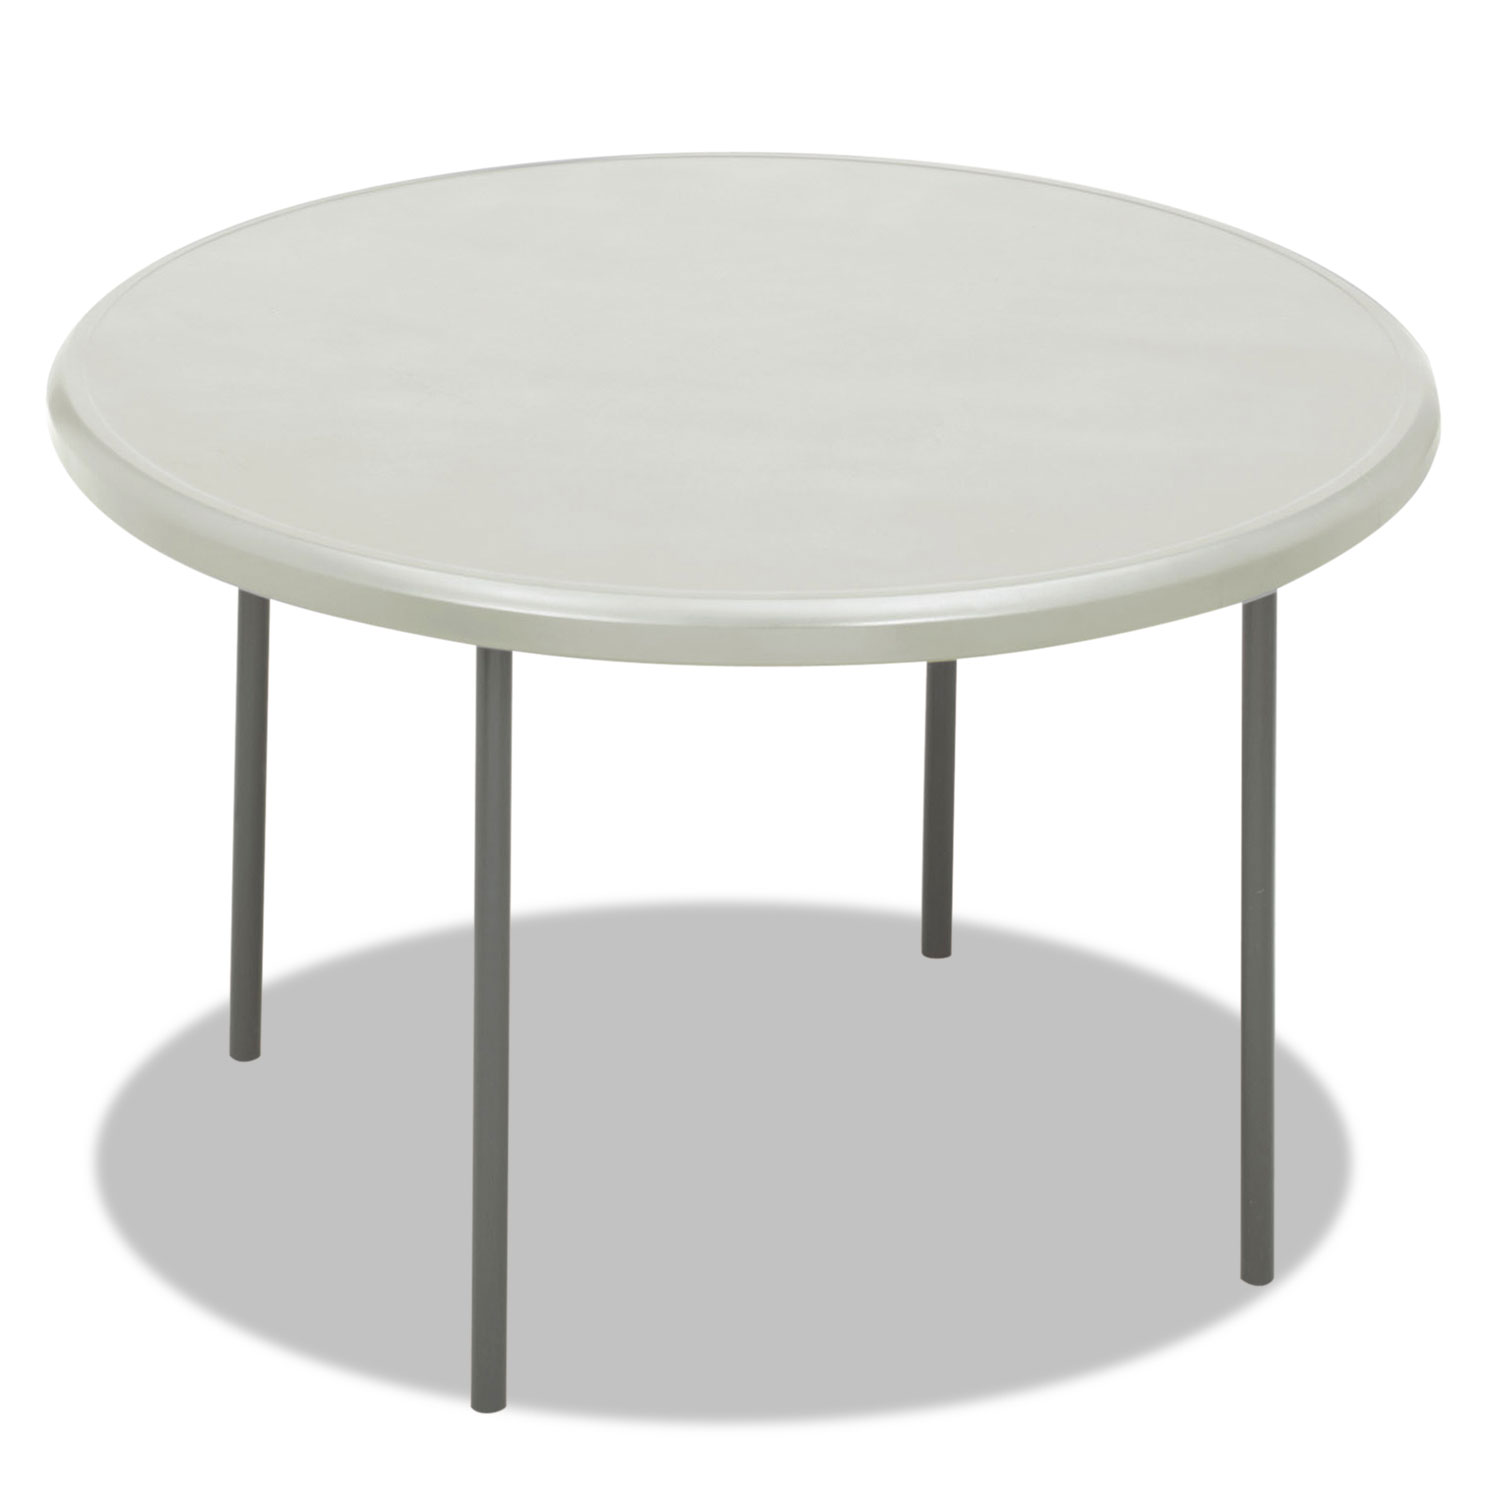  Iceberg 65243 IndestrucTables Too 1200 Series Resin Folding Table, 48 dia x 29h, Platinum (ICE65243) 